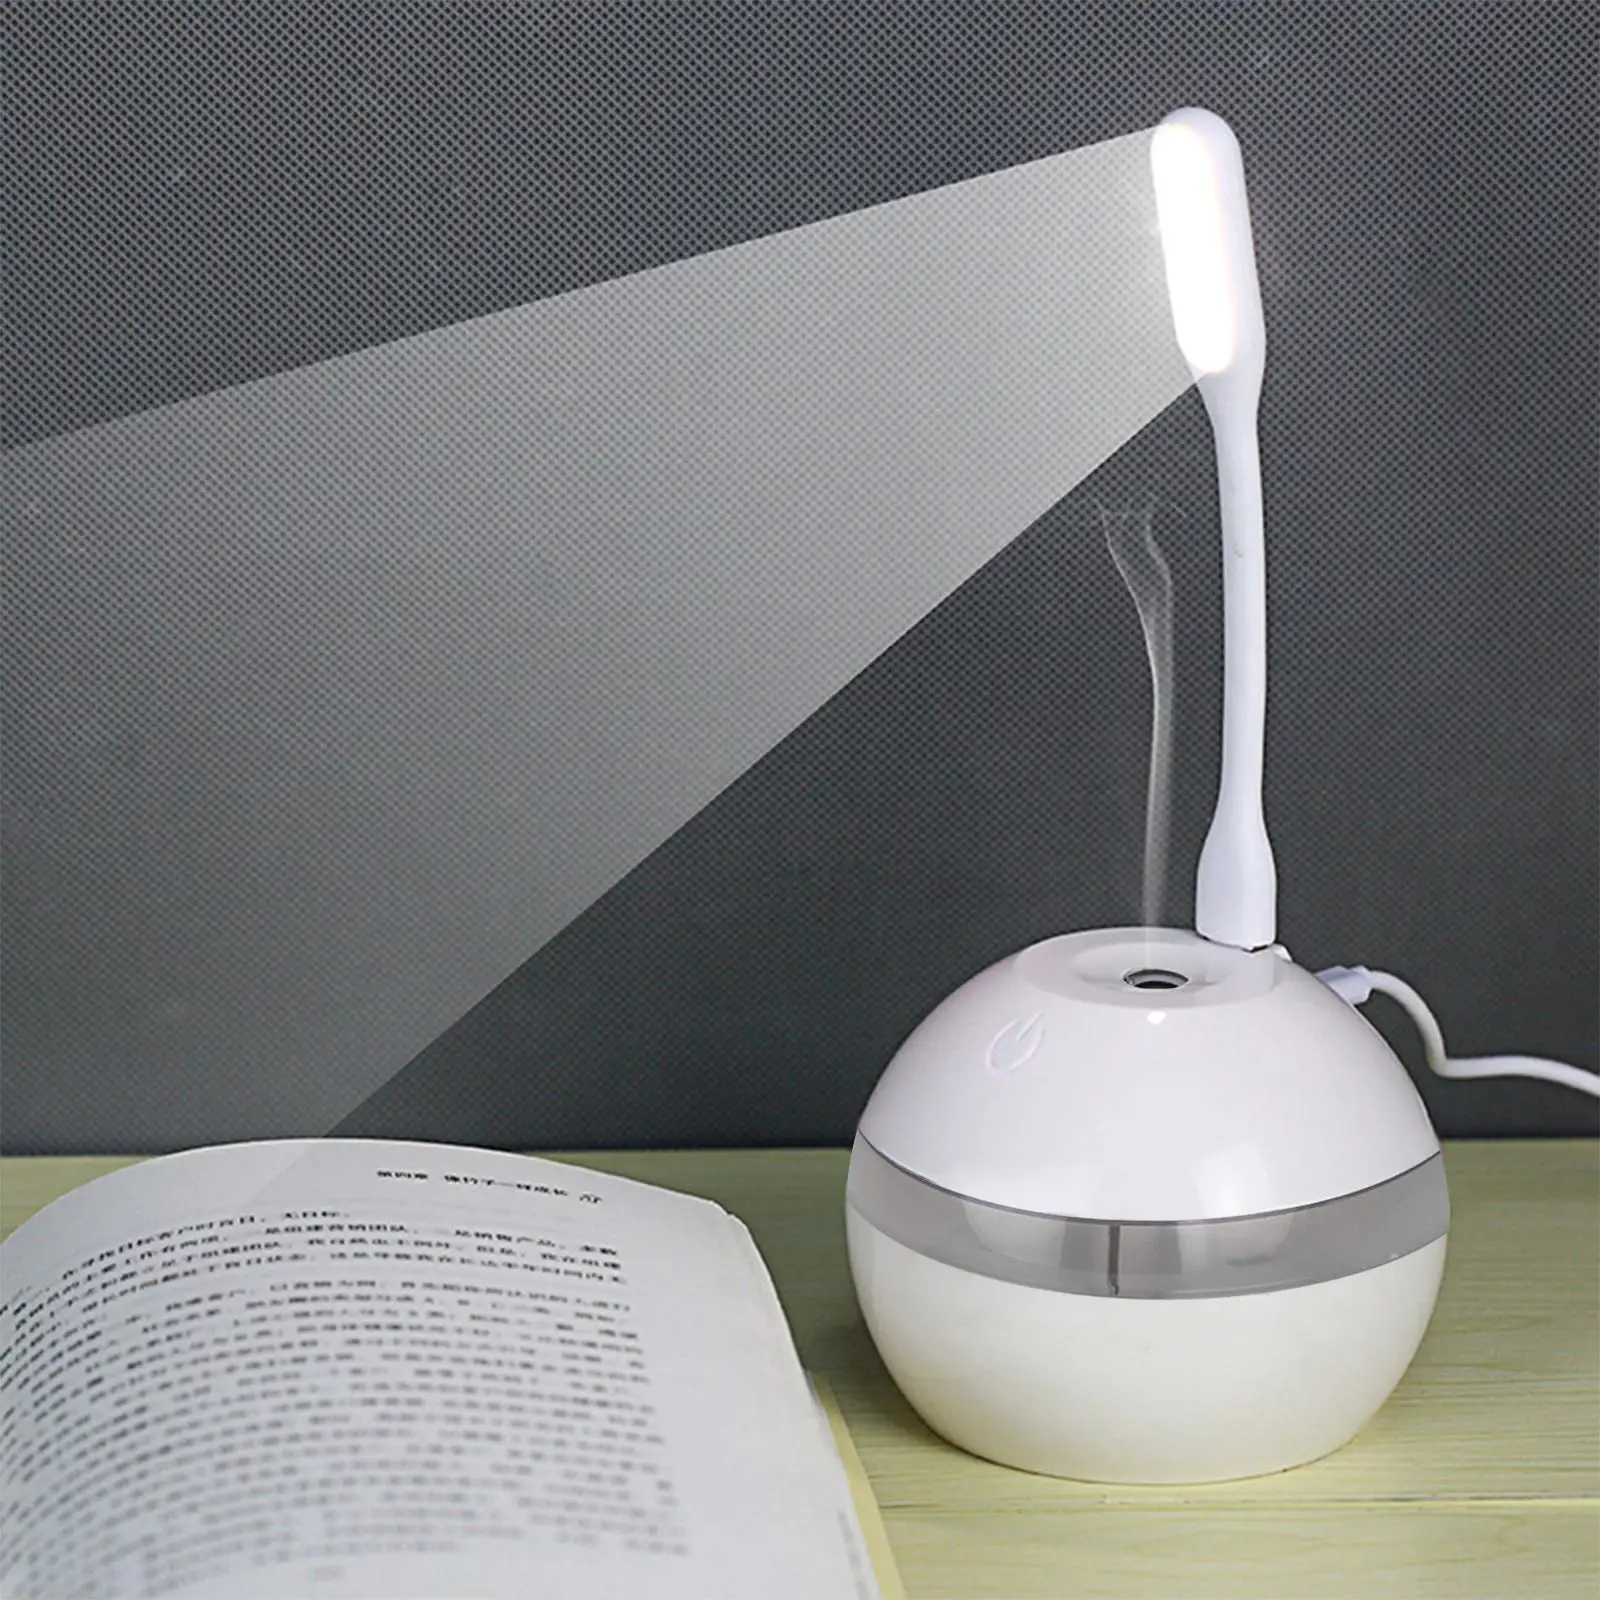 Household Humidifier Mini Night Light with  Globular Creative Tabletop Portable Air Conditioner USB Powered for Bedroom 